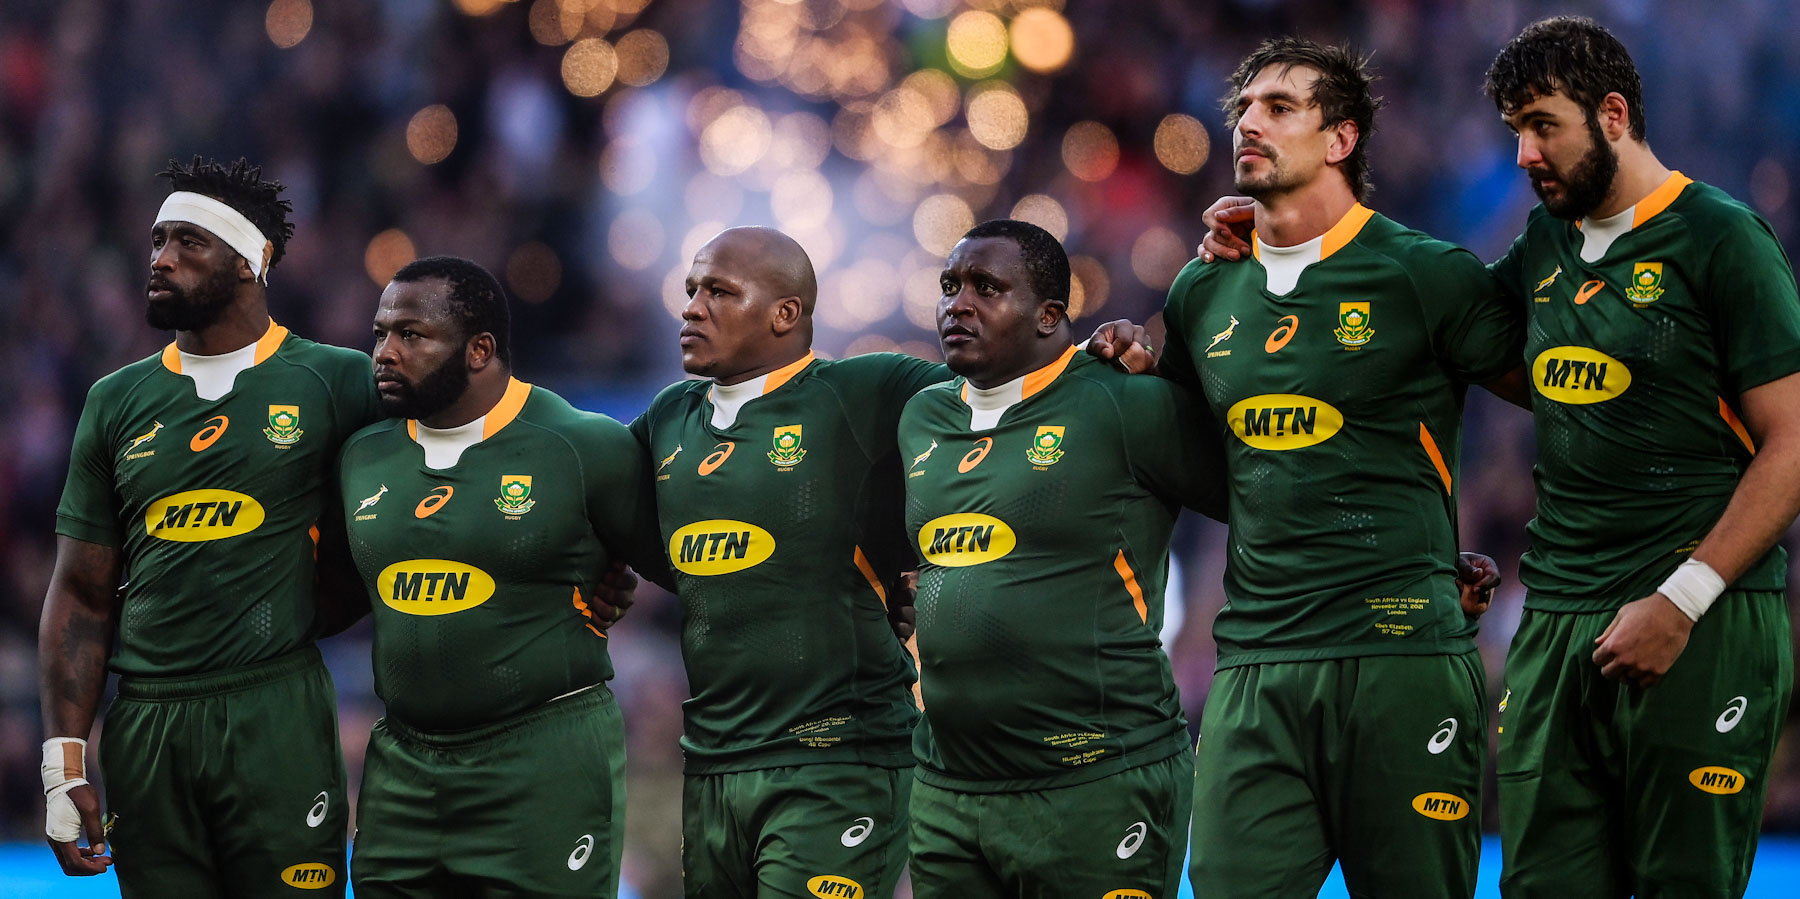 The Boks will line up in six home Tests in 2022.